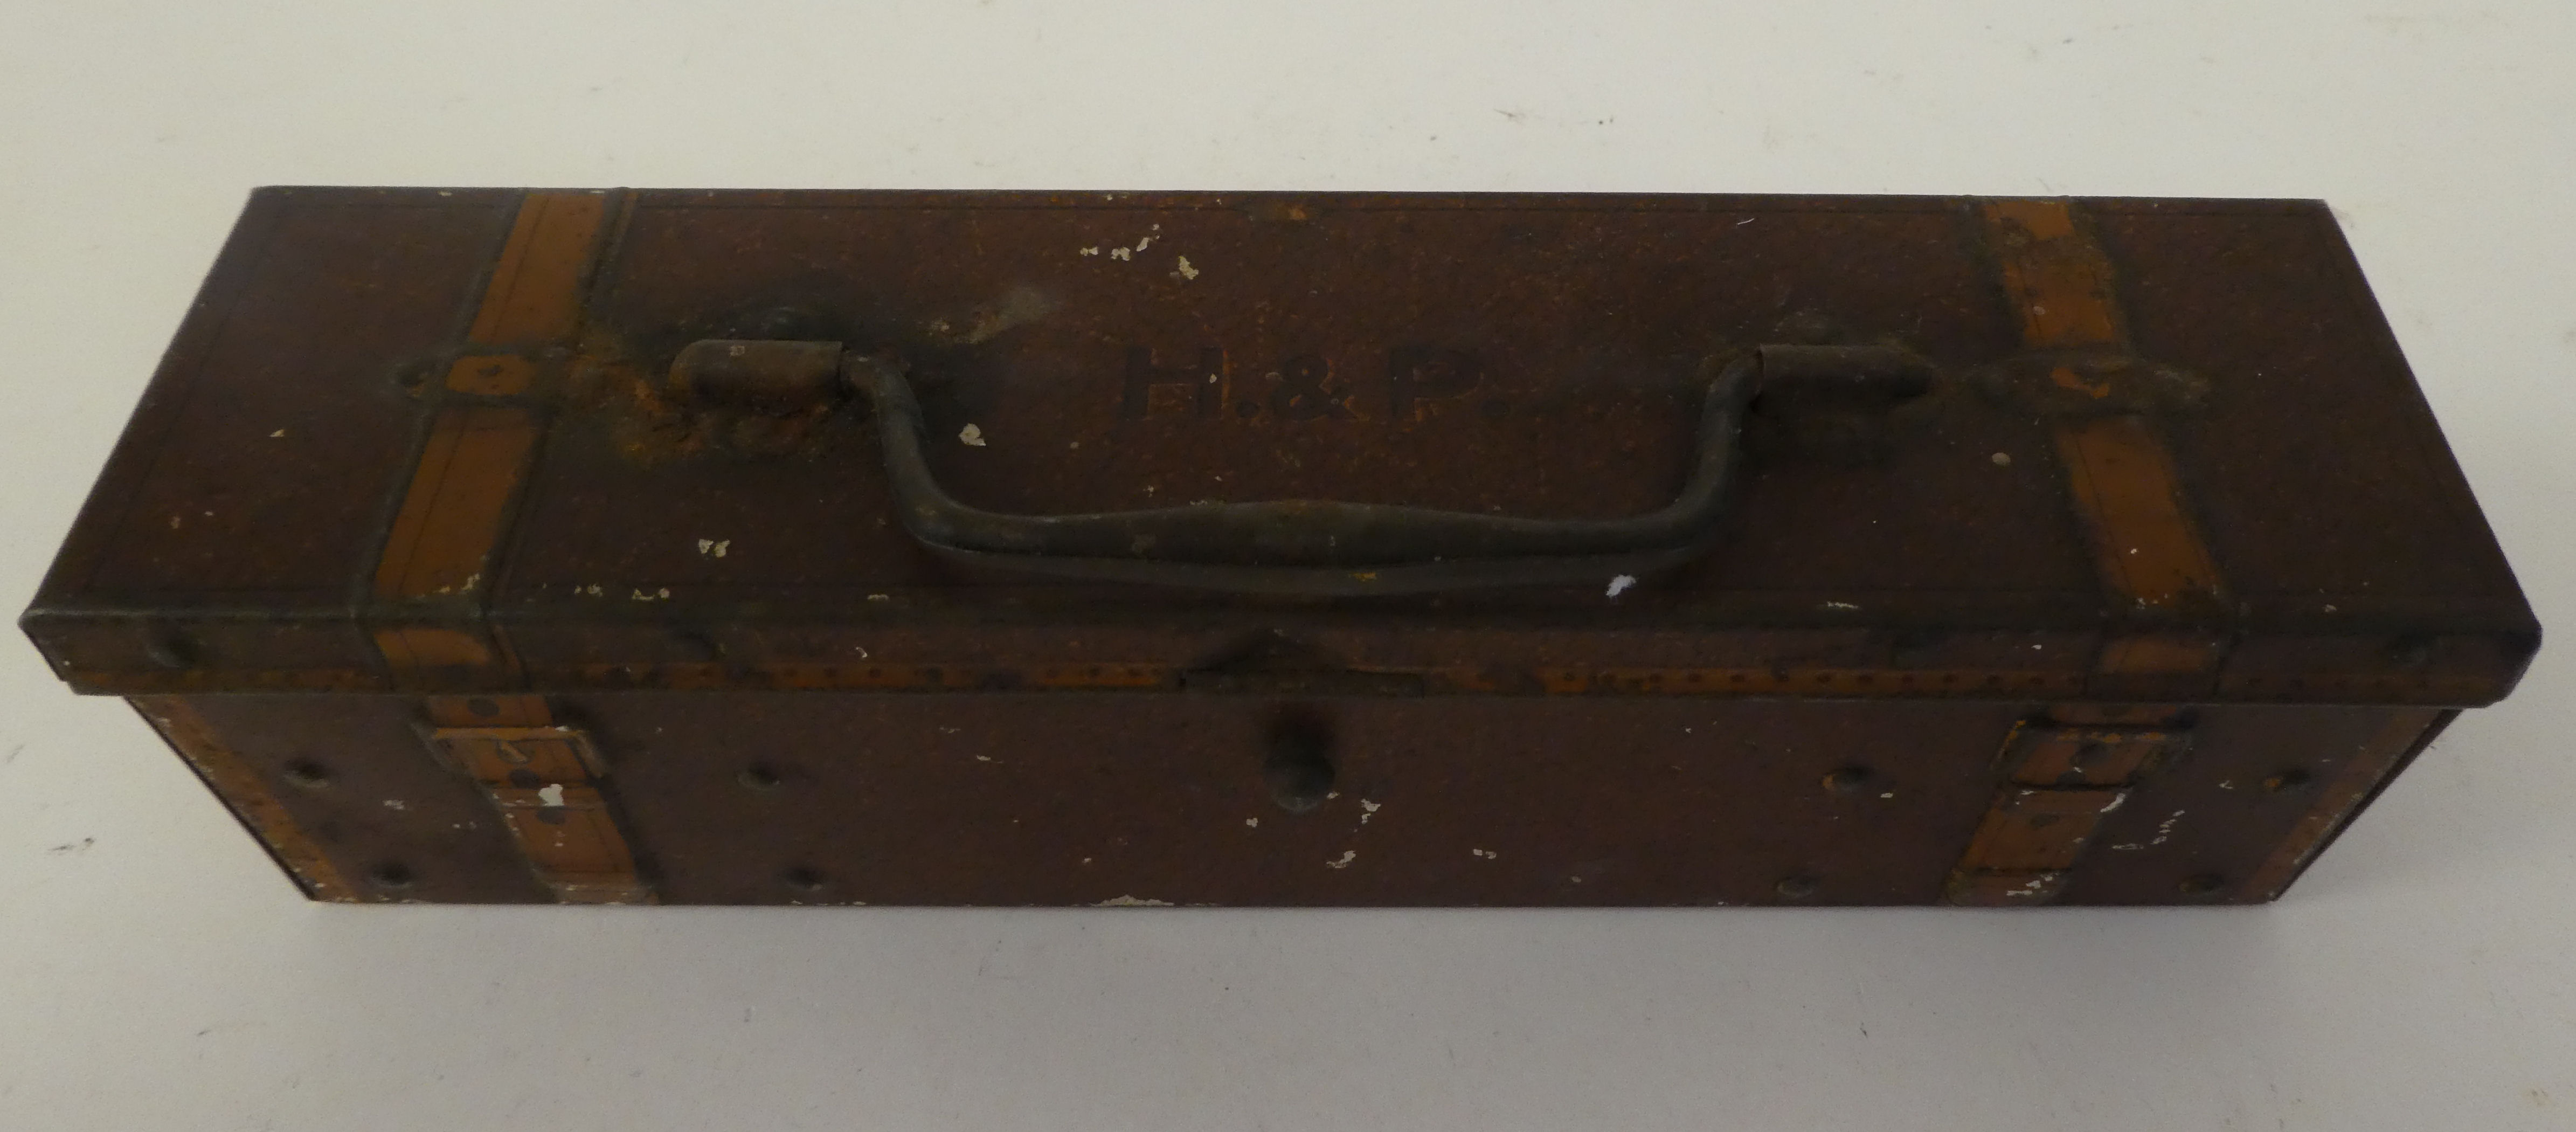 A Vintage Huntley & Palmers printed tinplate biscuit box, fashioned as a trunk with a bail handle - Image 3 of 5